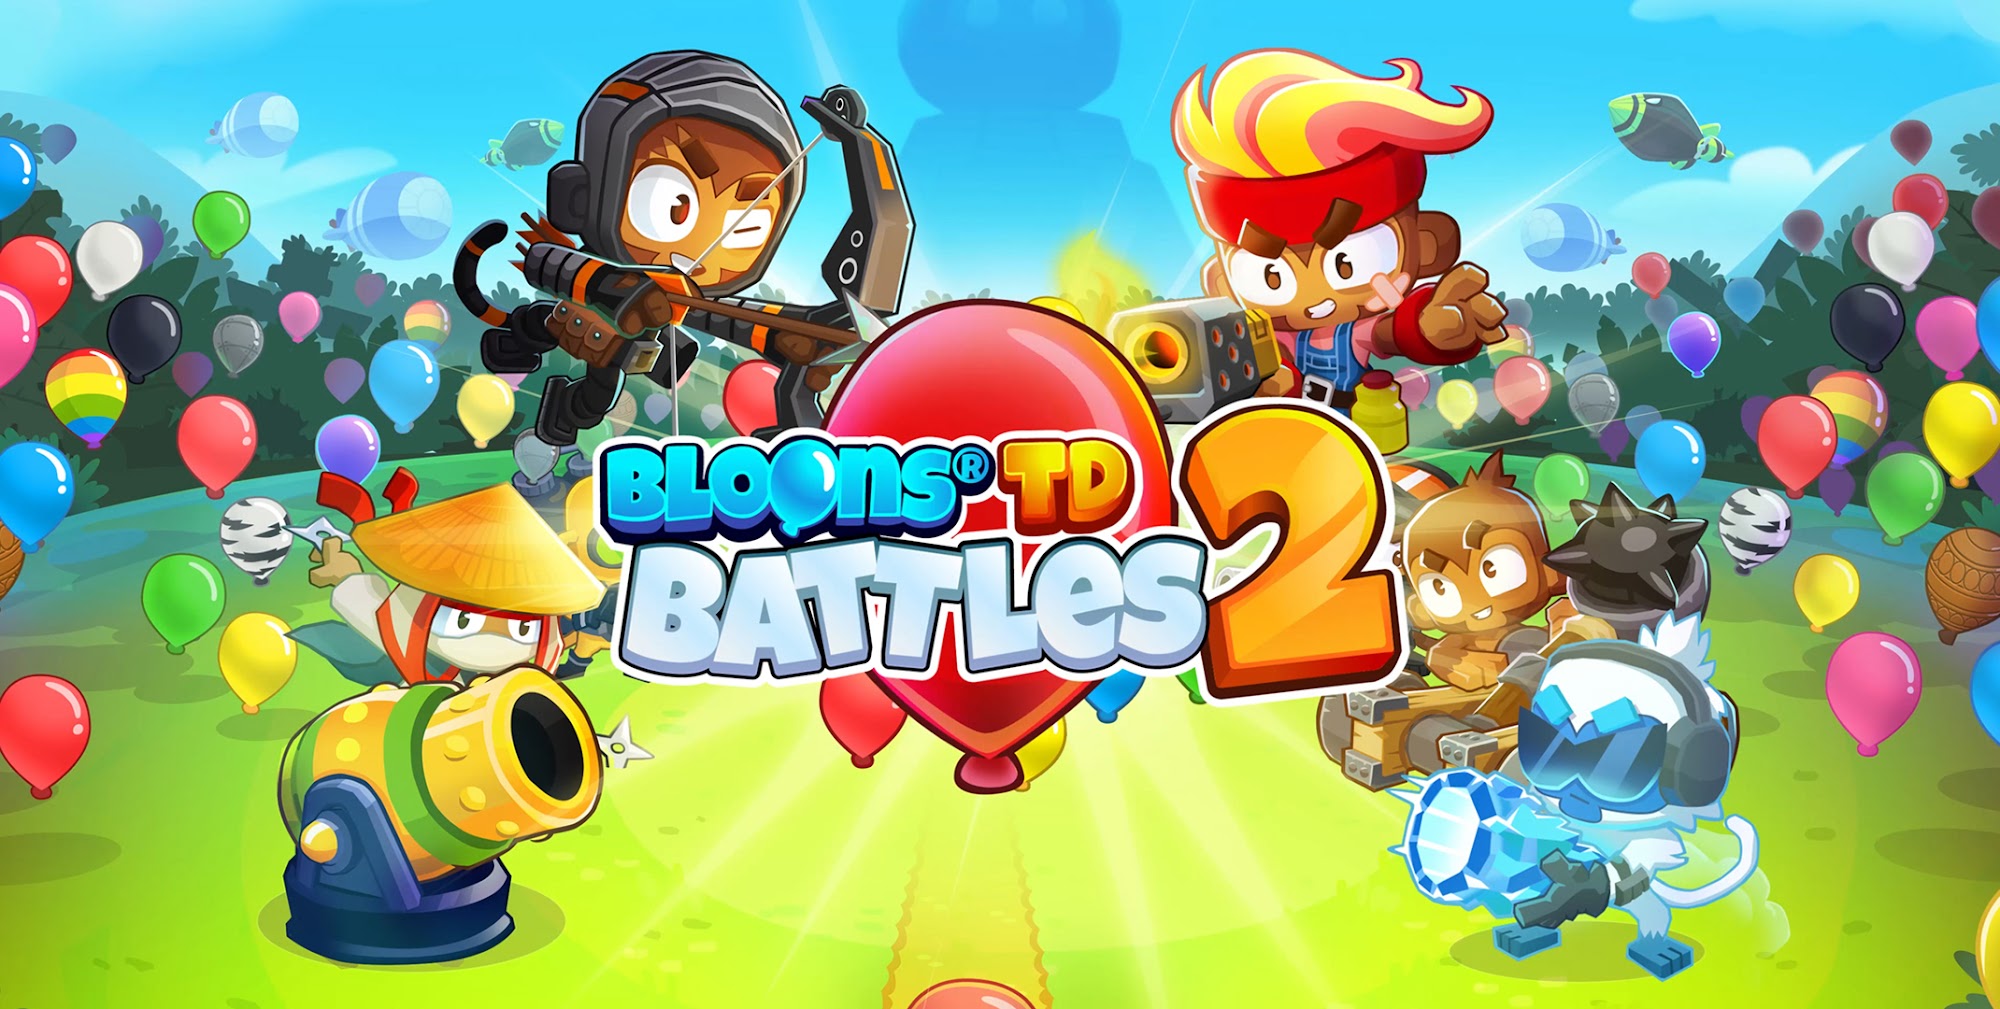 Scarica Bloons TD Battles 2 gratis per Android.